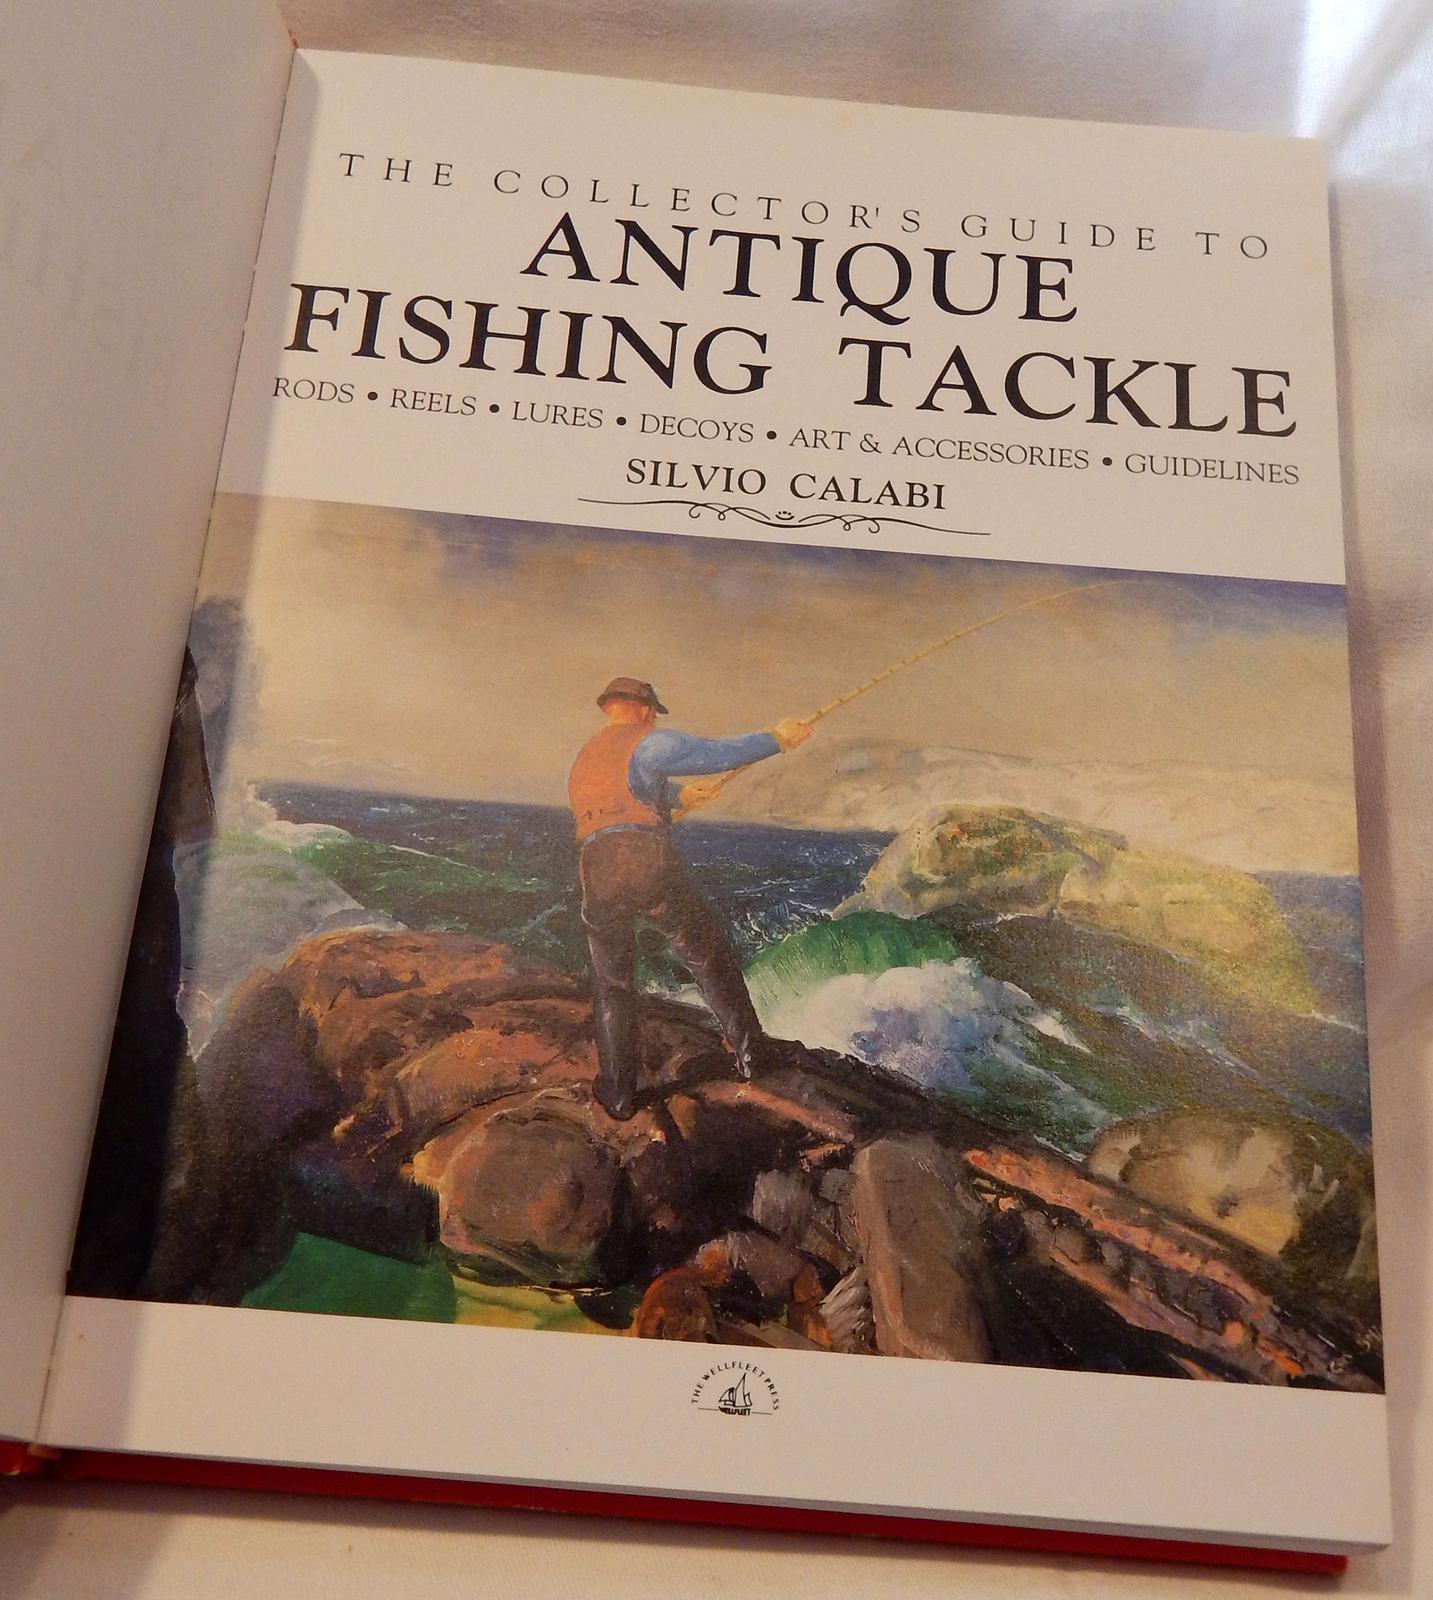 Collector's Guide to Antique Fishing Tackle